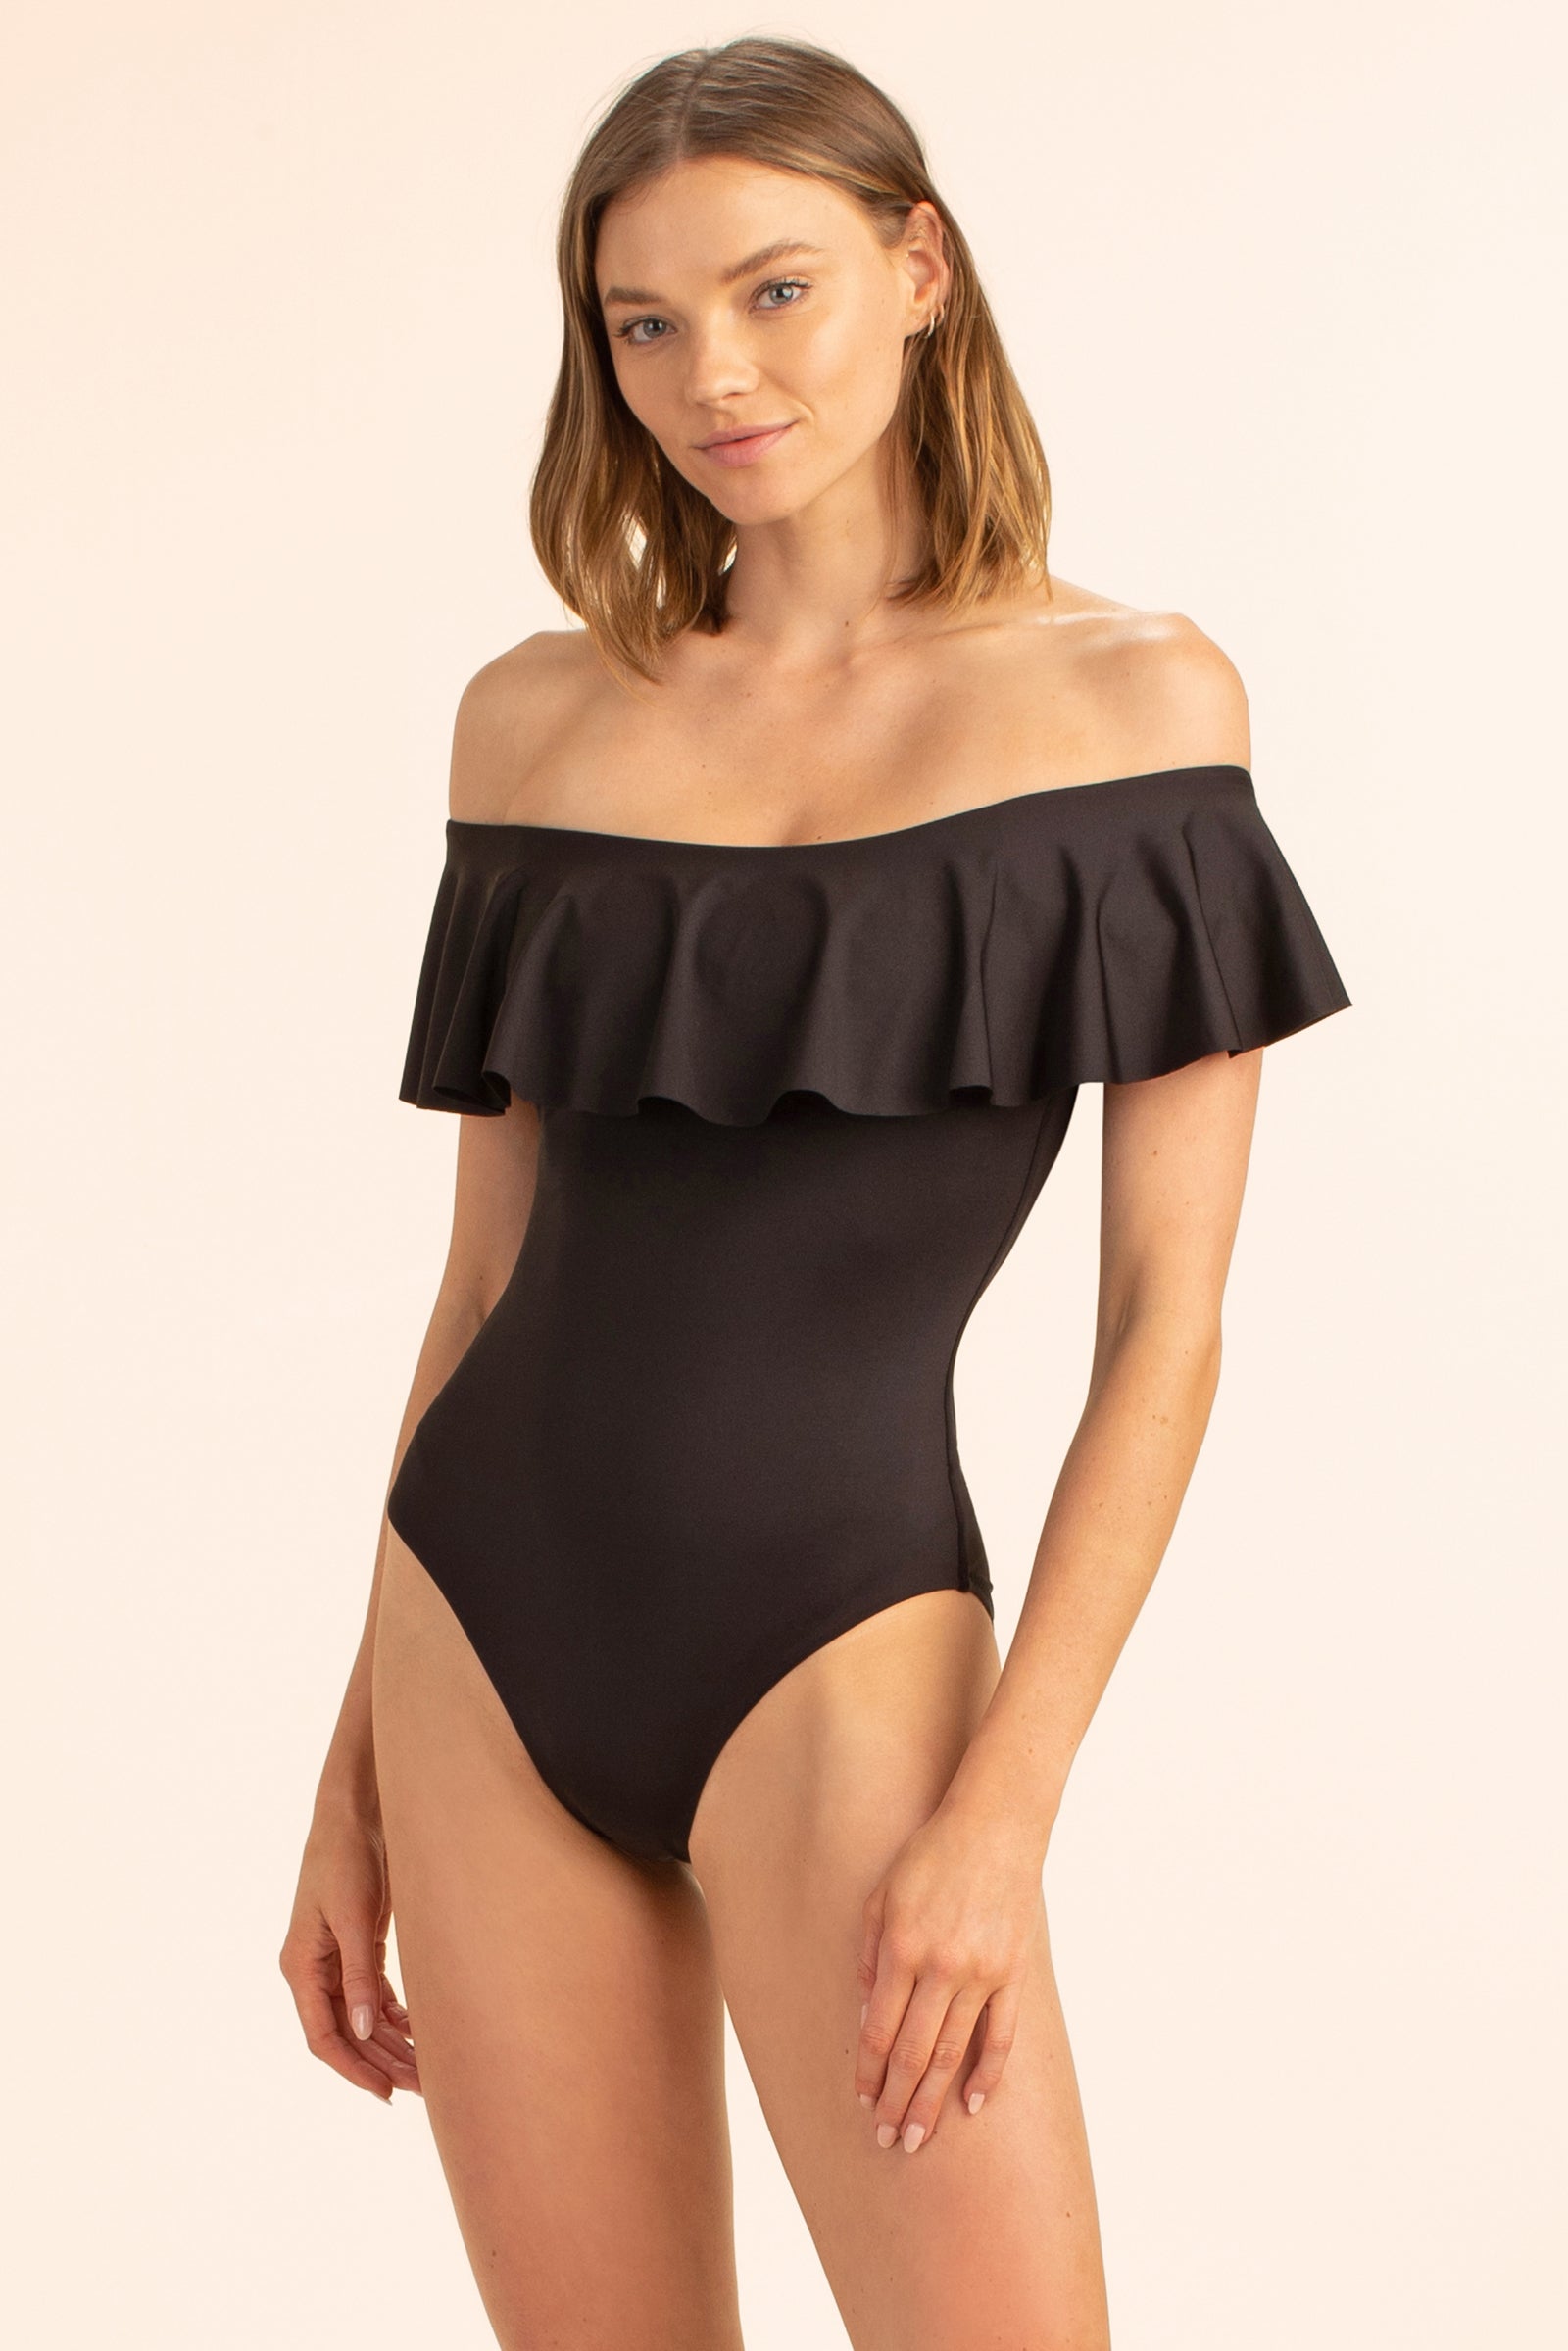 MONACO SOLIDS OFF THE SHOULDER RUFFLE ONE PIECE SWIMSUIT – Trina Turk